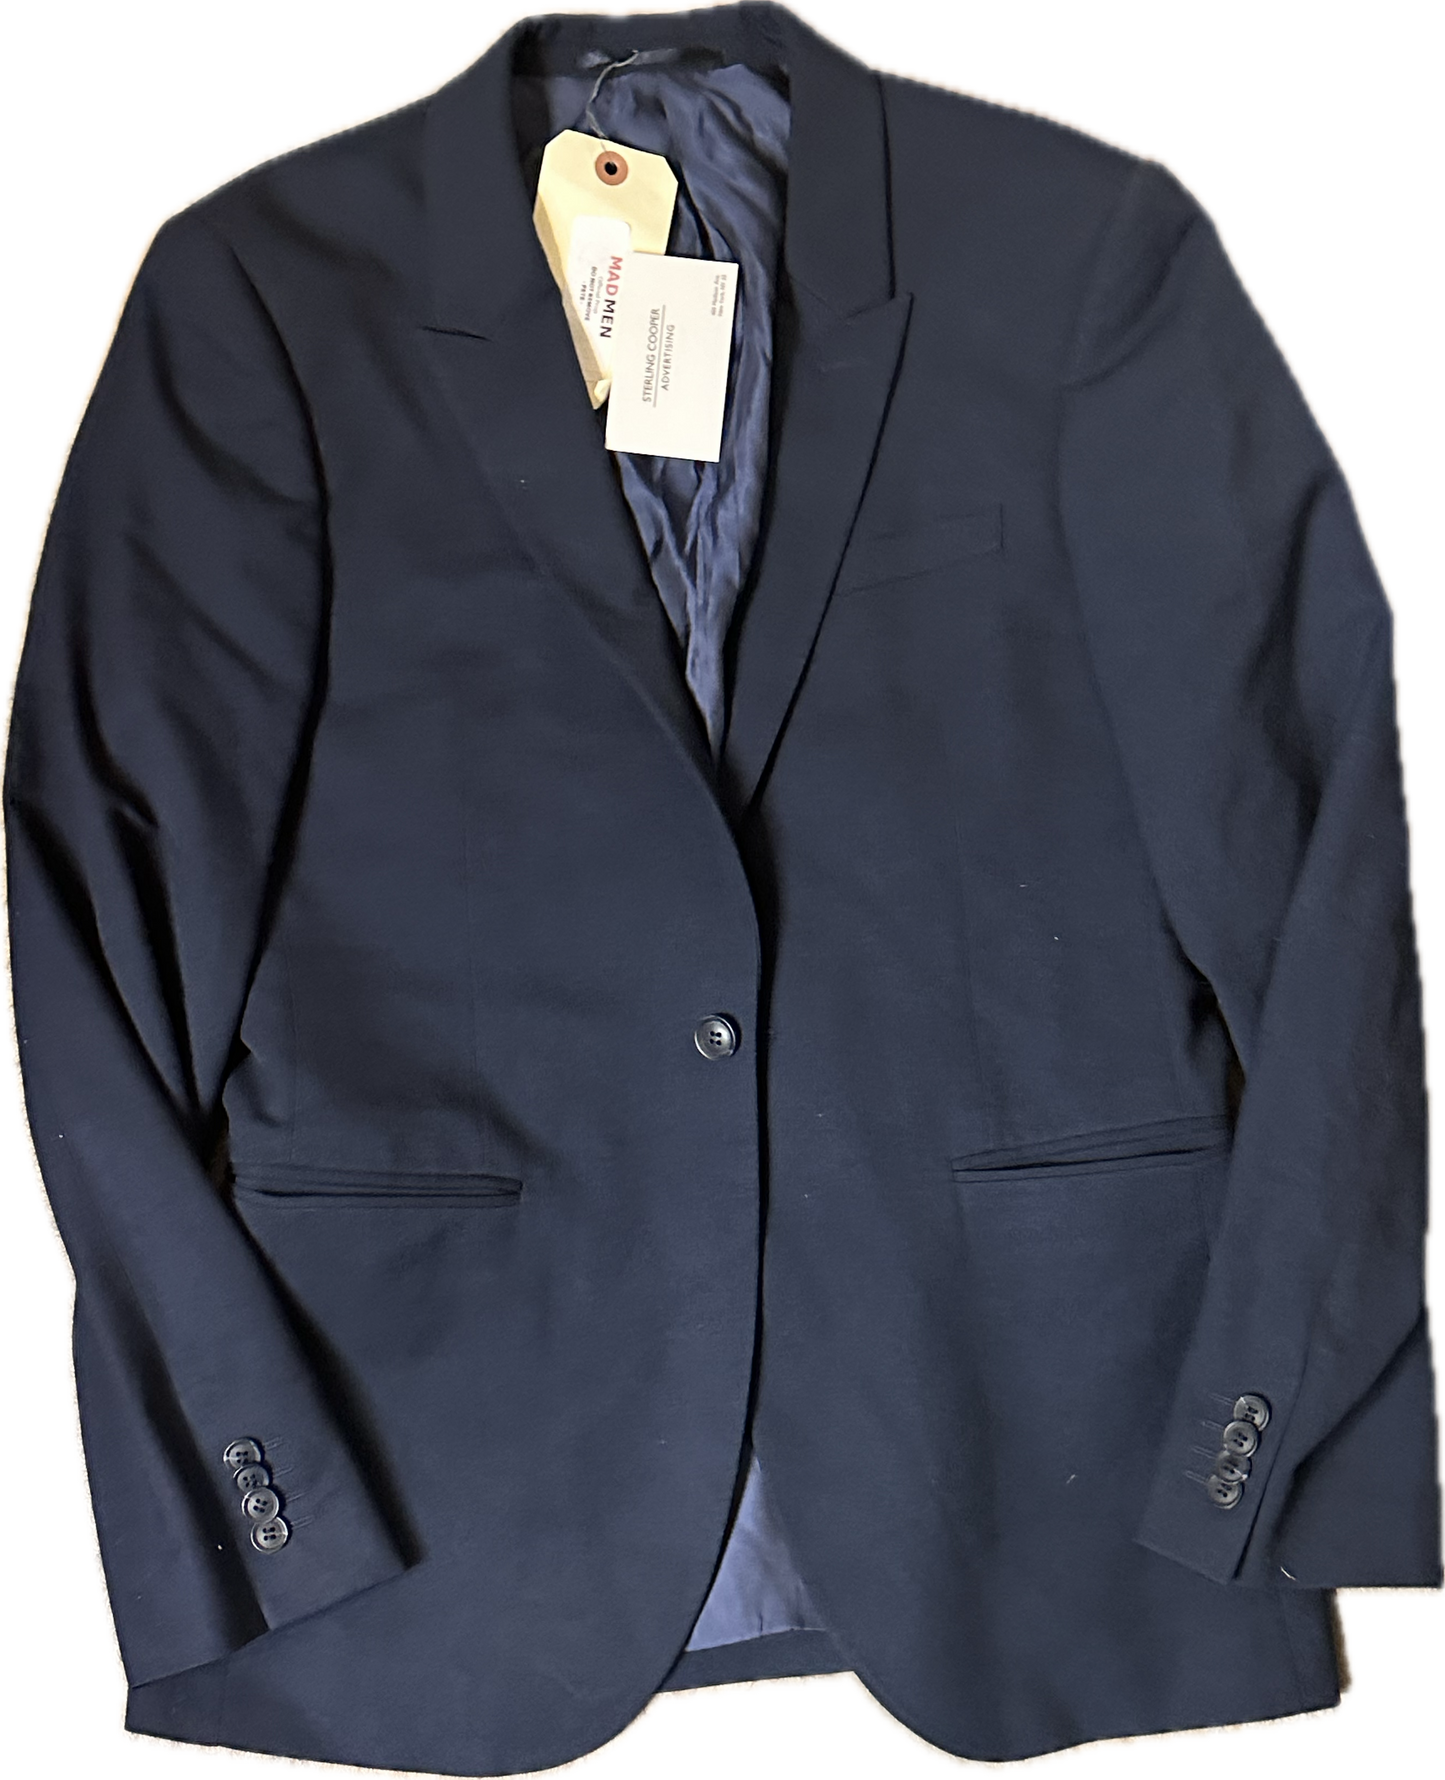 MAD MEN: Pete Campbell's 1960s style Single Button Navy Blue Sport Coat (M)